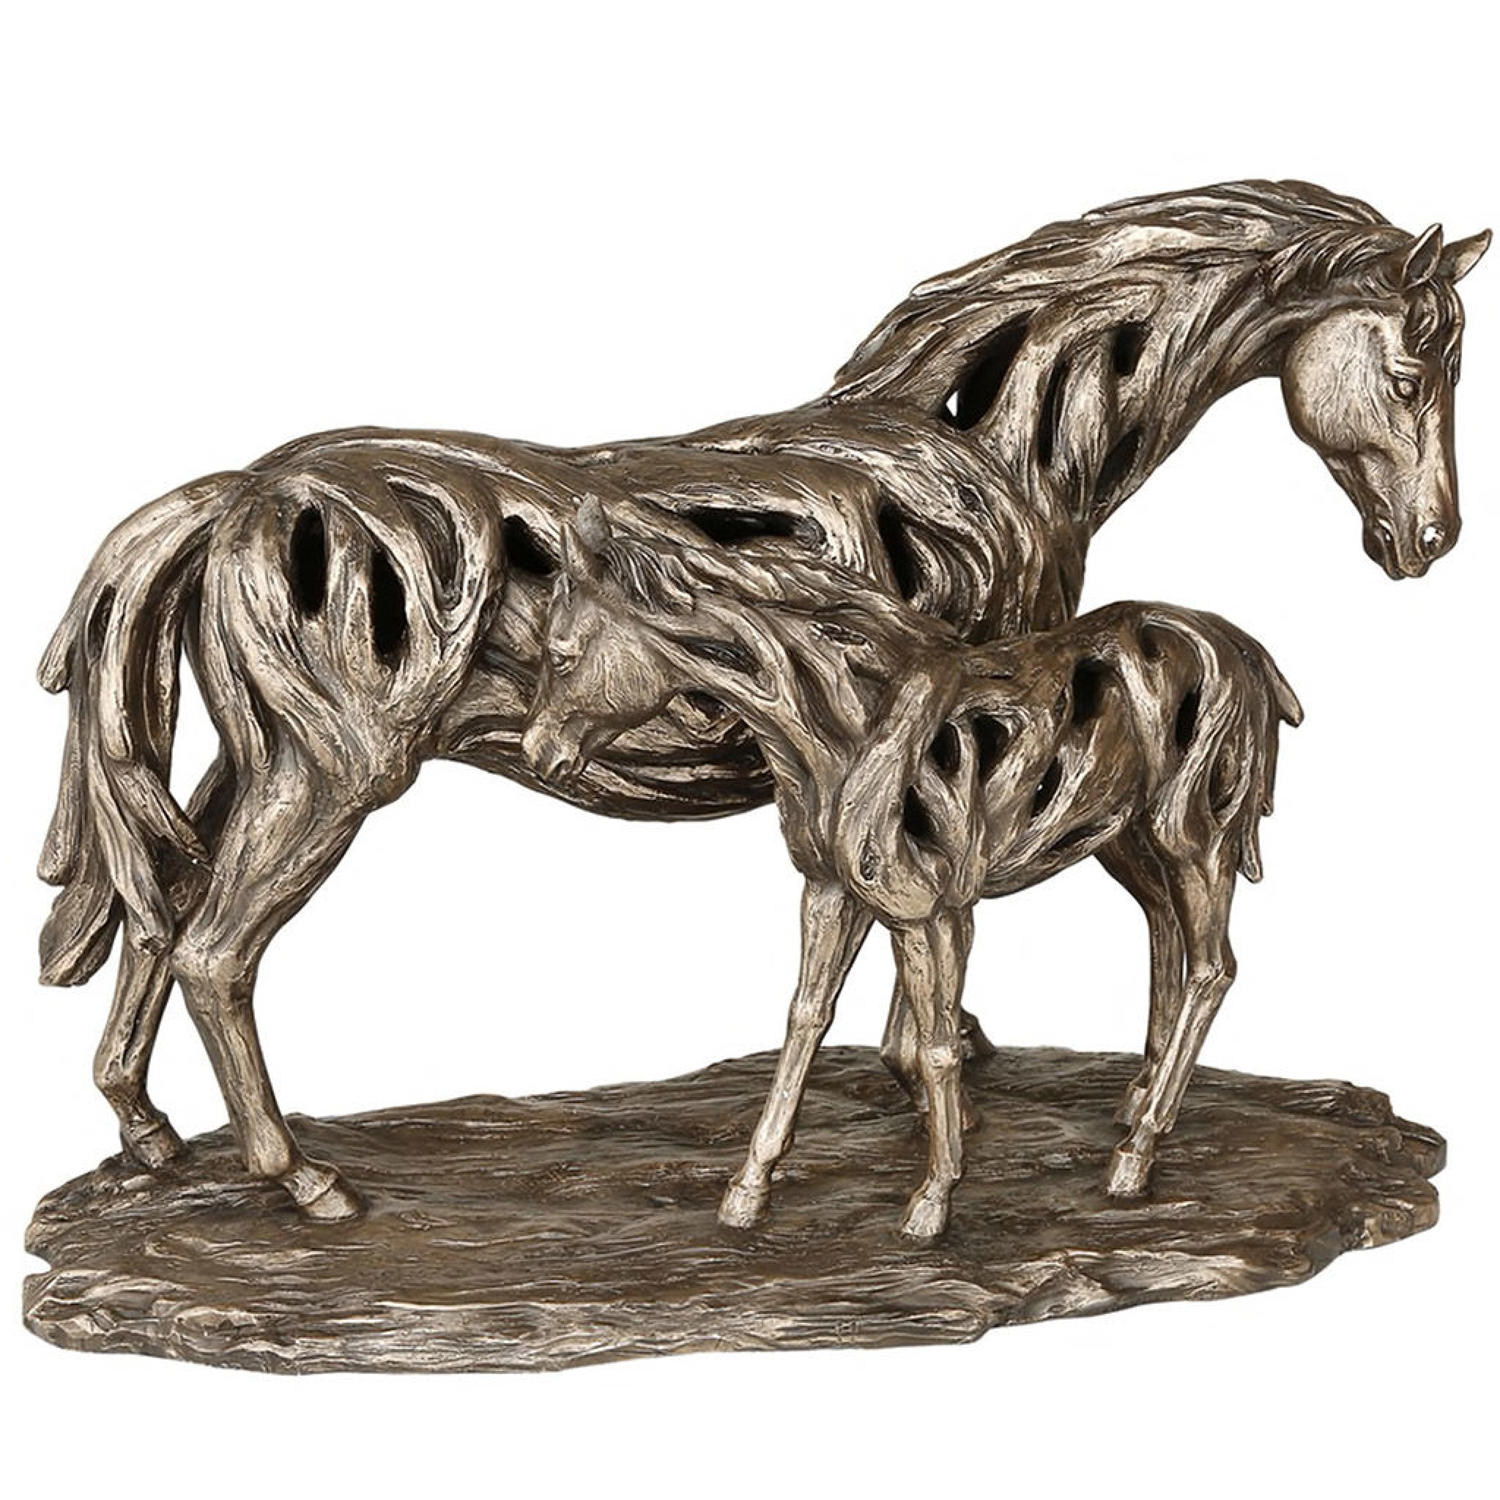 Driftwood Mare and Foal sculpture